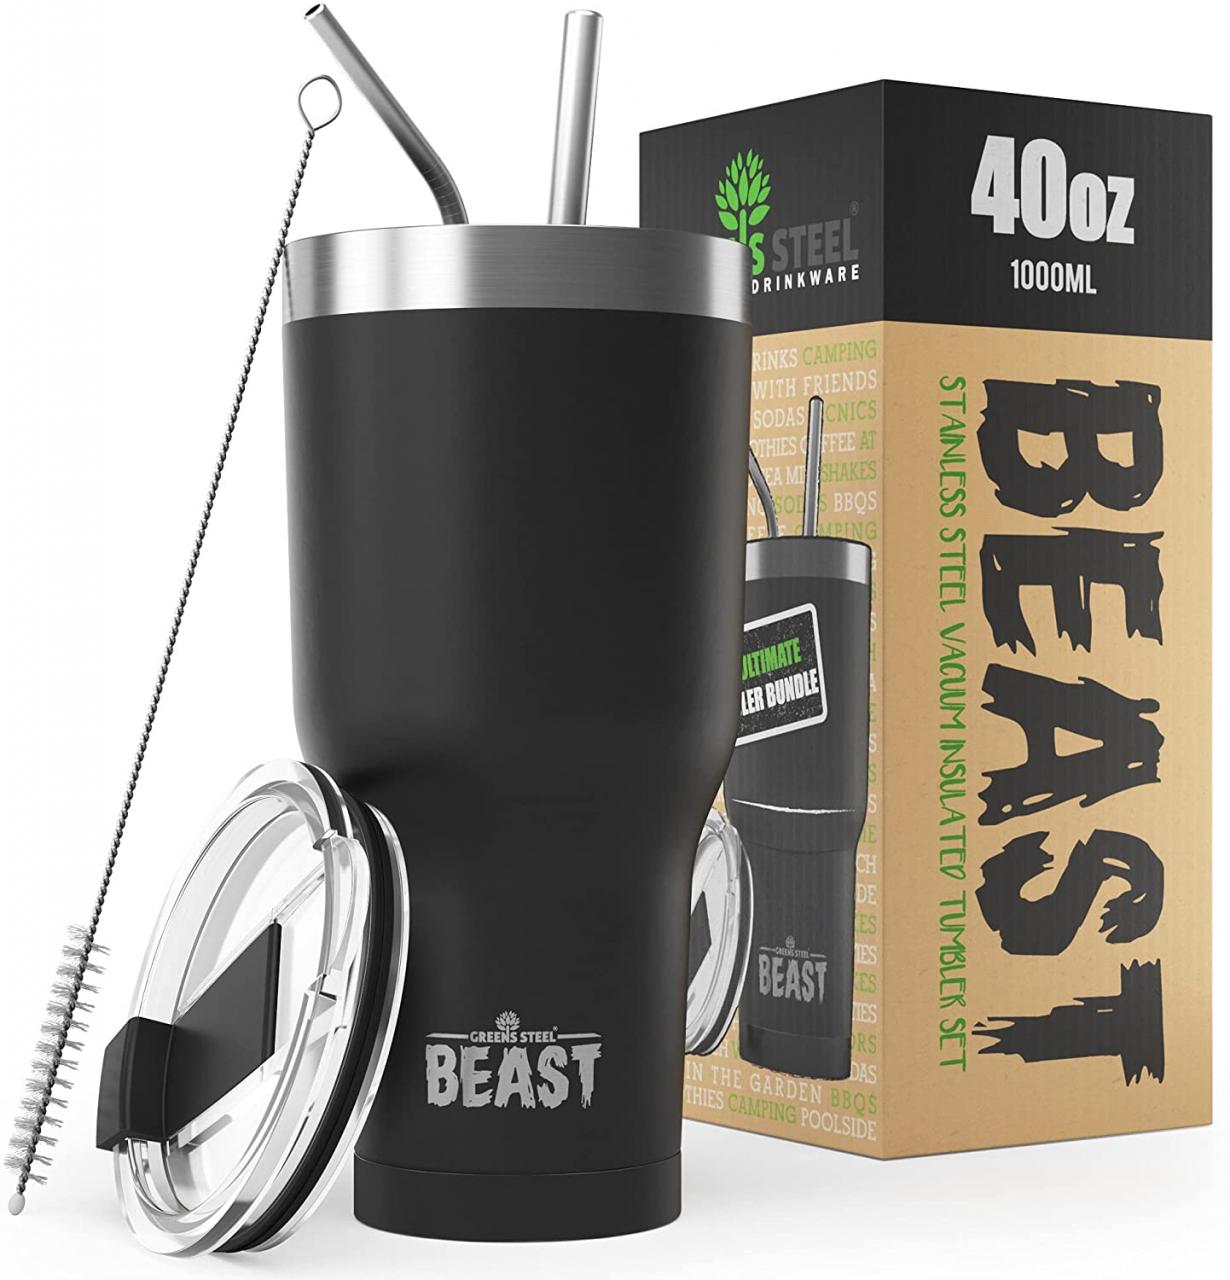 Buy Greens Steel Beast 40oz Black Tumbler - Stainless Steel Insulated Coffee  Cup with Lid, 2 Straws, Brush & Gift Box Online in Hungary. B08GTPXJBL